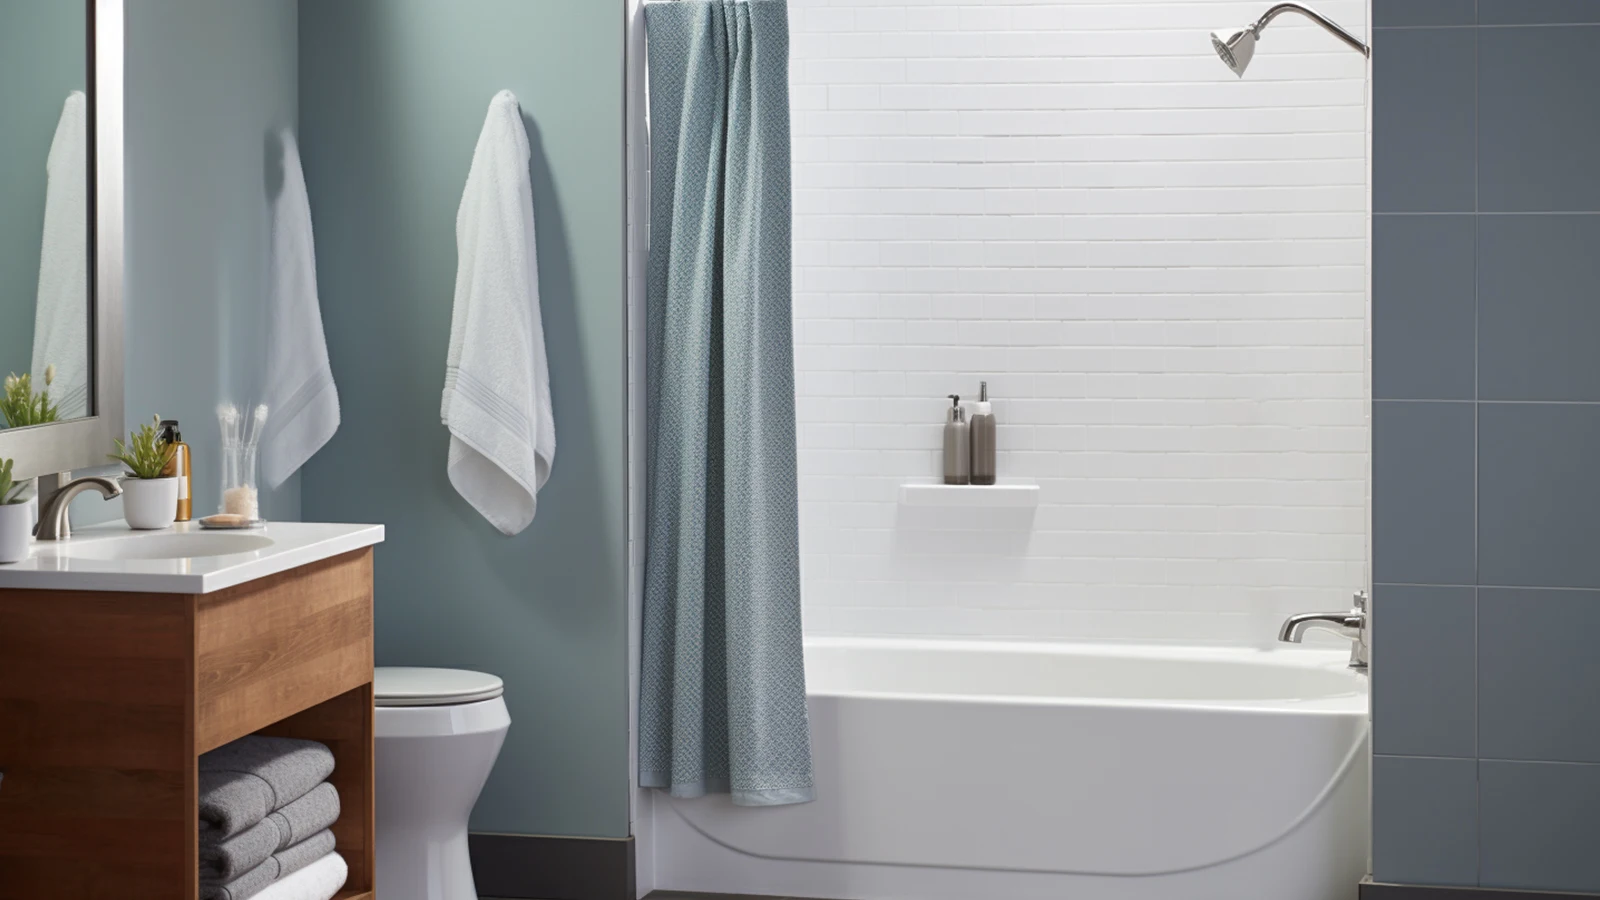 how to keep shower curtain closed? A bathroom with a bathtub, sink, and toilet.